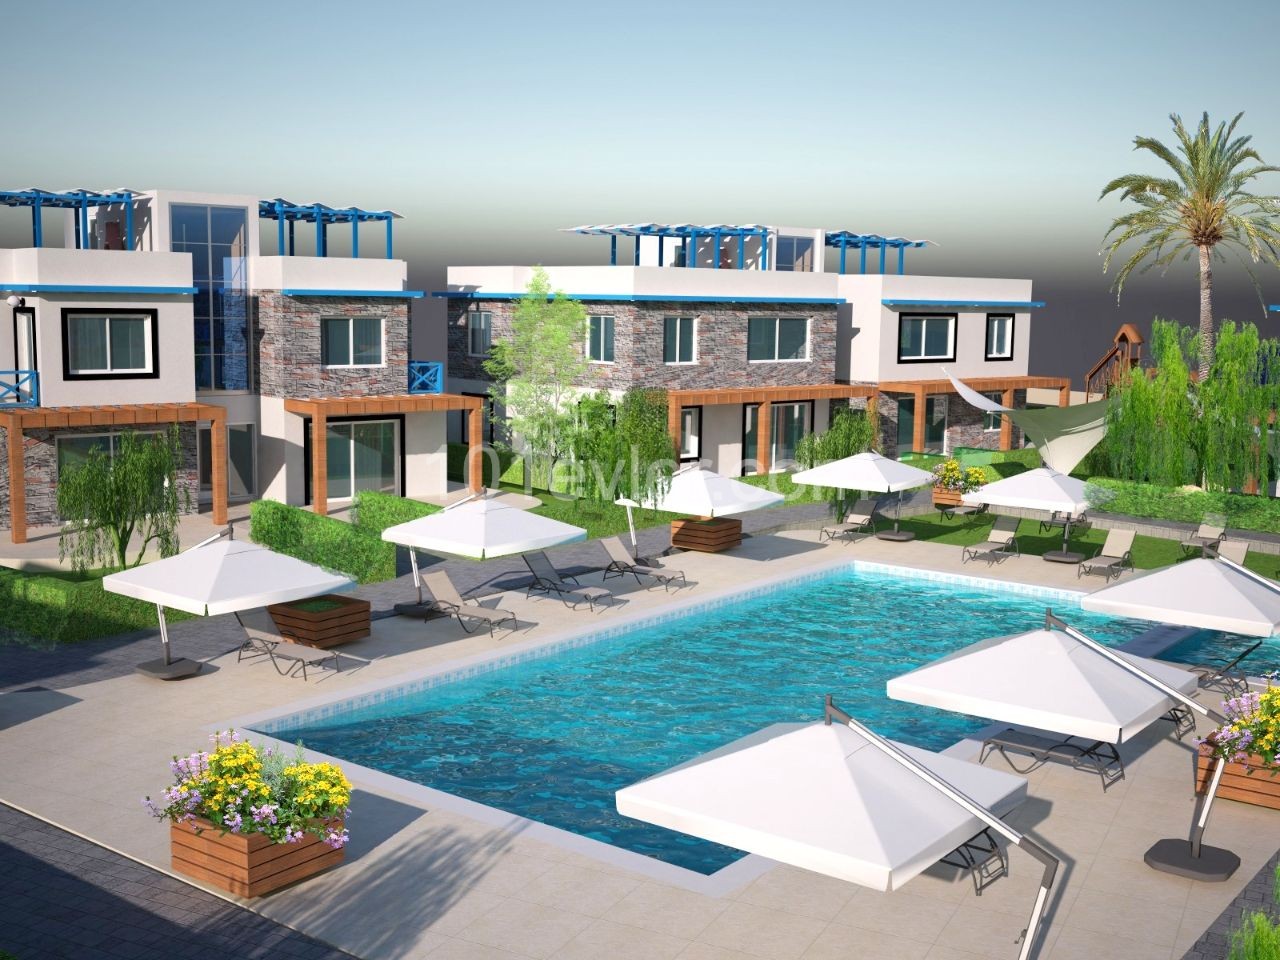 Turkish deed apartments in a complex with a pool, 300 meters from the sea in Karsiyaka, Girne. With ground floor or upper floor terrace options. 05338403555 ** 